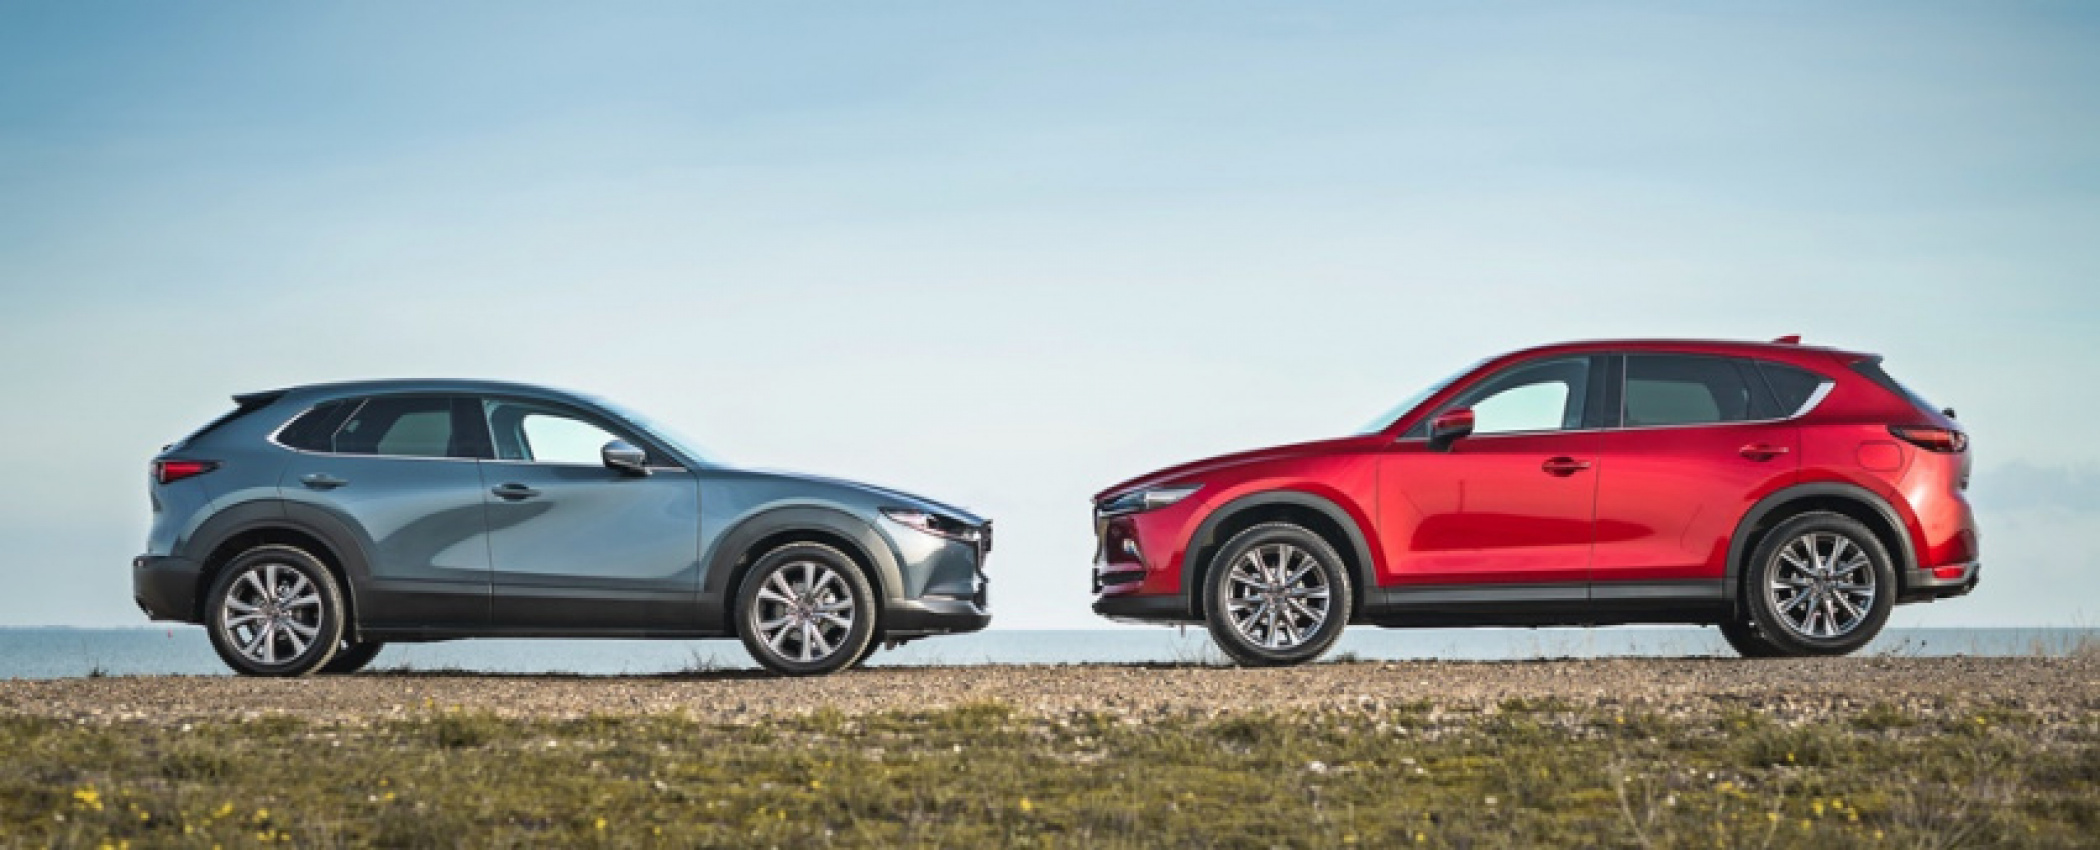 autos, cars, mazda, e-skyactiv, electrification, mazda cx-60, mazda cx-70, mazda cx-80, mazda cx-90, mazda mx-30, skyactiv-d, skyactiv-x, mazda to complete electrification of products by 2030, with major focus on european markets